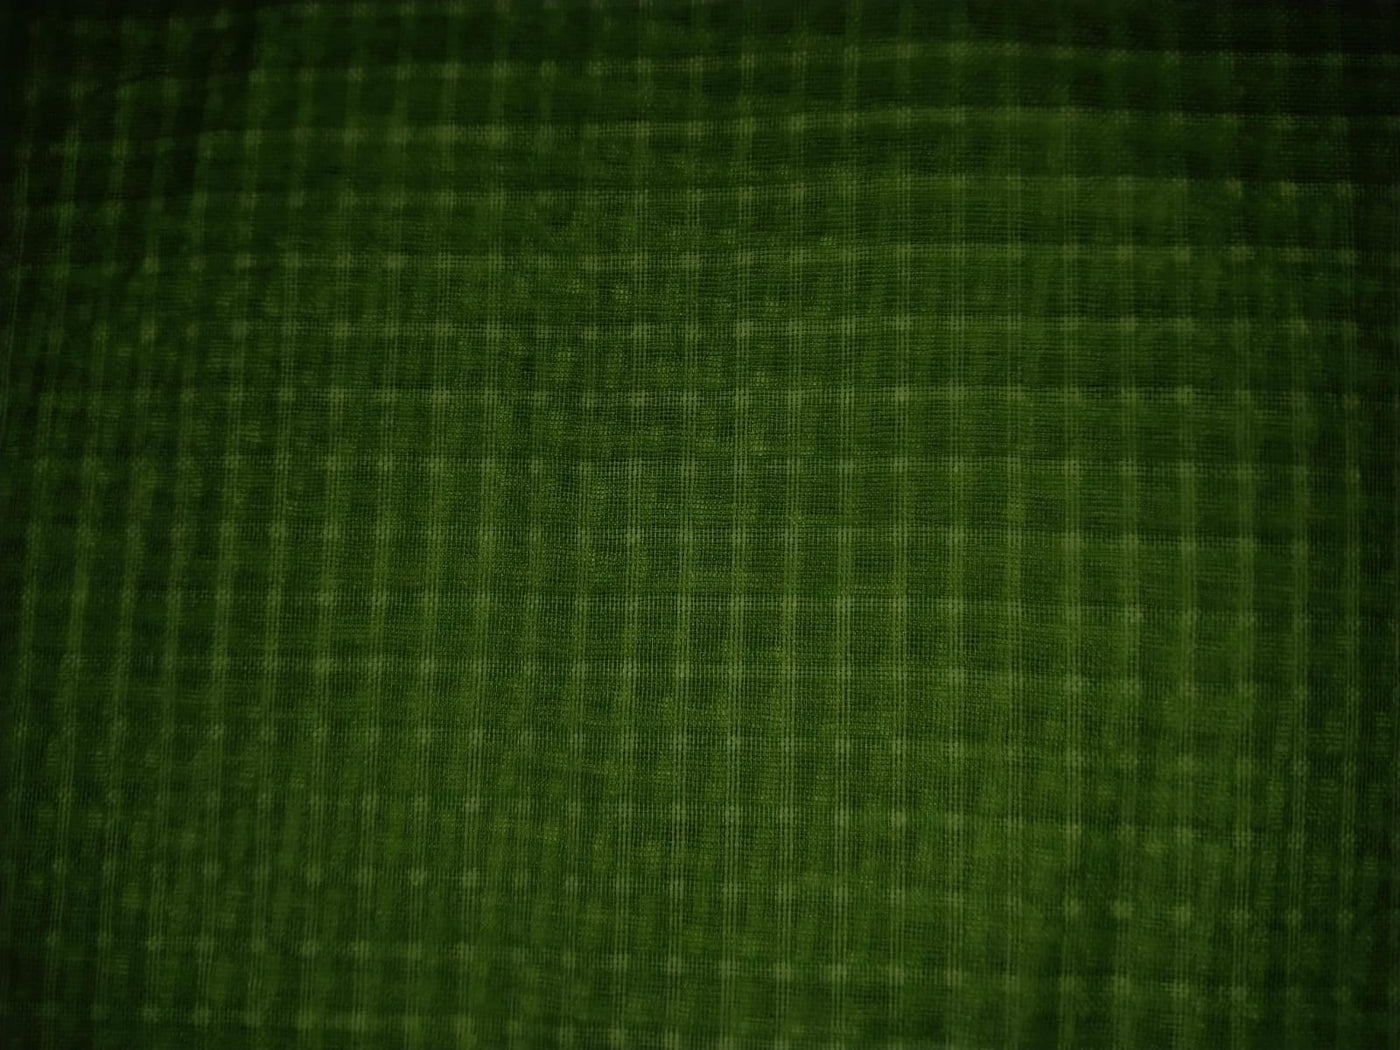 Cotton Organdy Micro Check stiff finish-4 mm x 4 mm size 44'' wide available in [GREEN 0.85 YARDS IVORY 1 YARD ONLY PEACH 1.40 YARDS MAJENTA BY THE YARD]